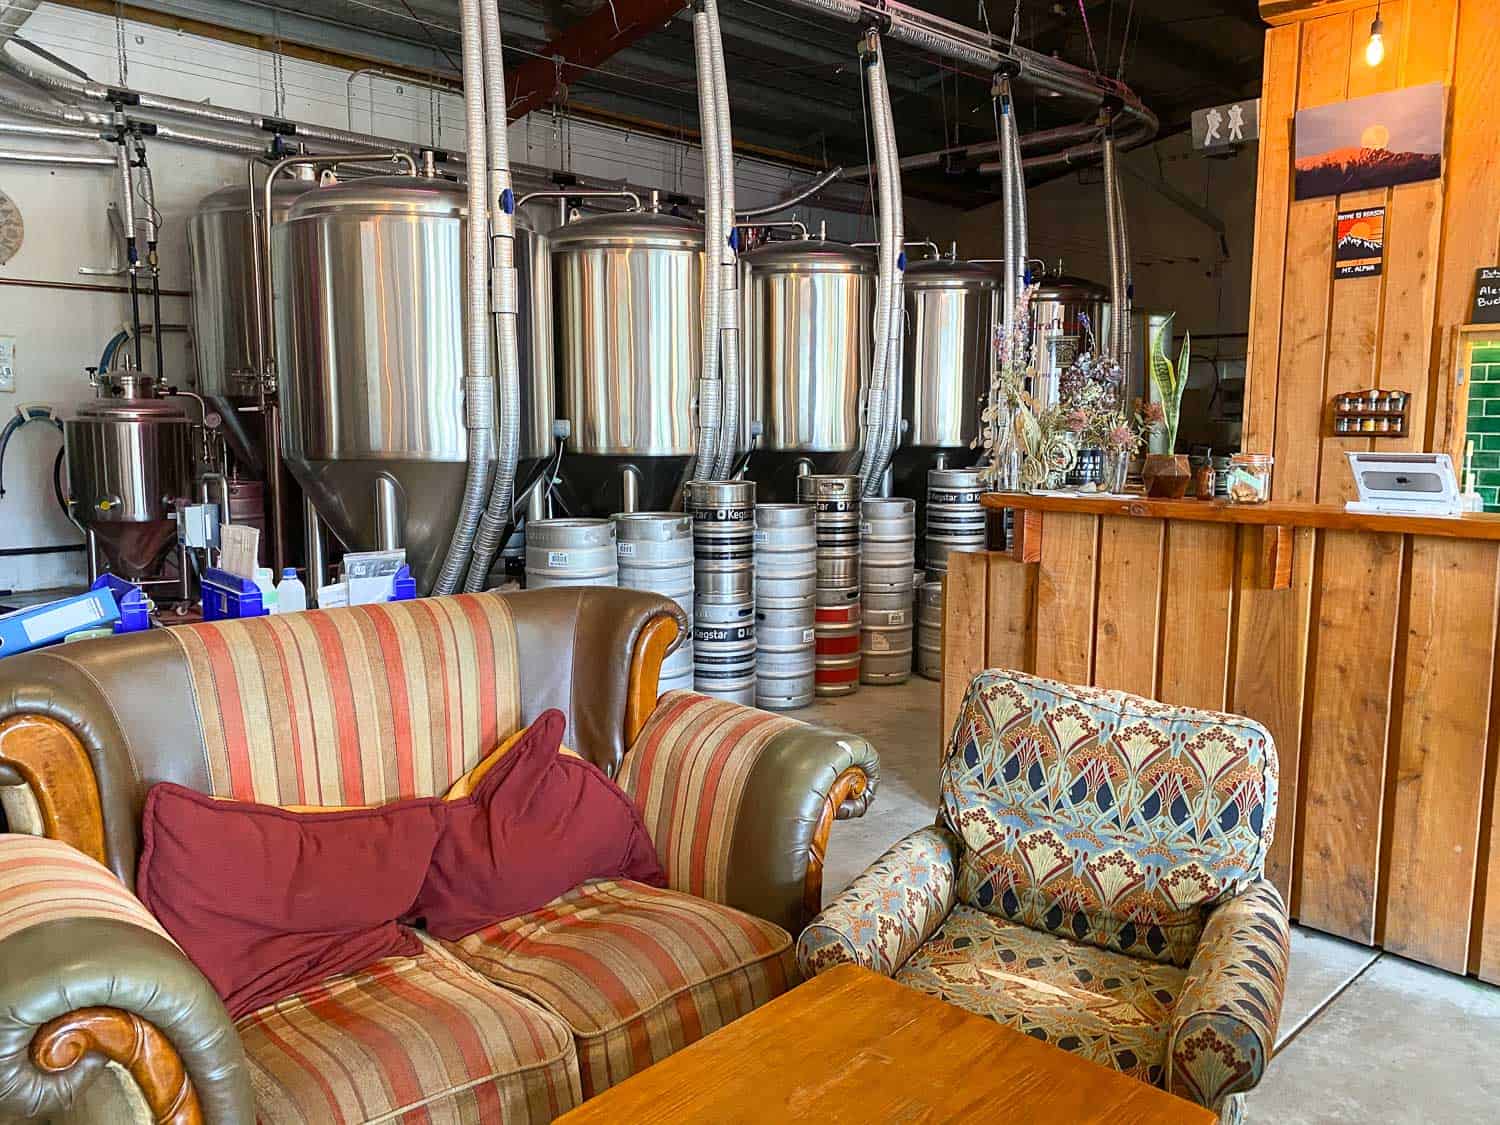 Kegs, bar and couches at Rhyme and Reason Brewery in Wanaka, New Zealand